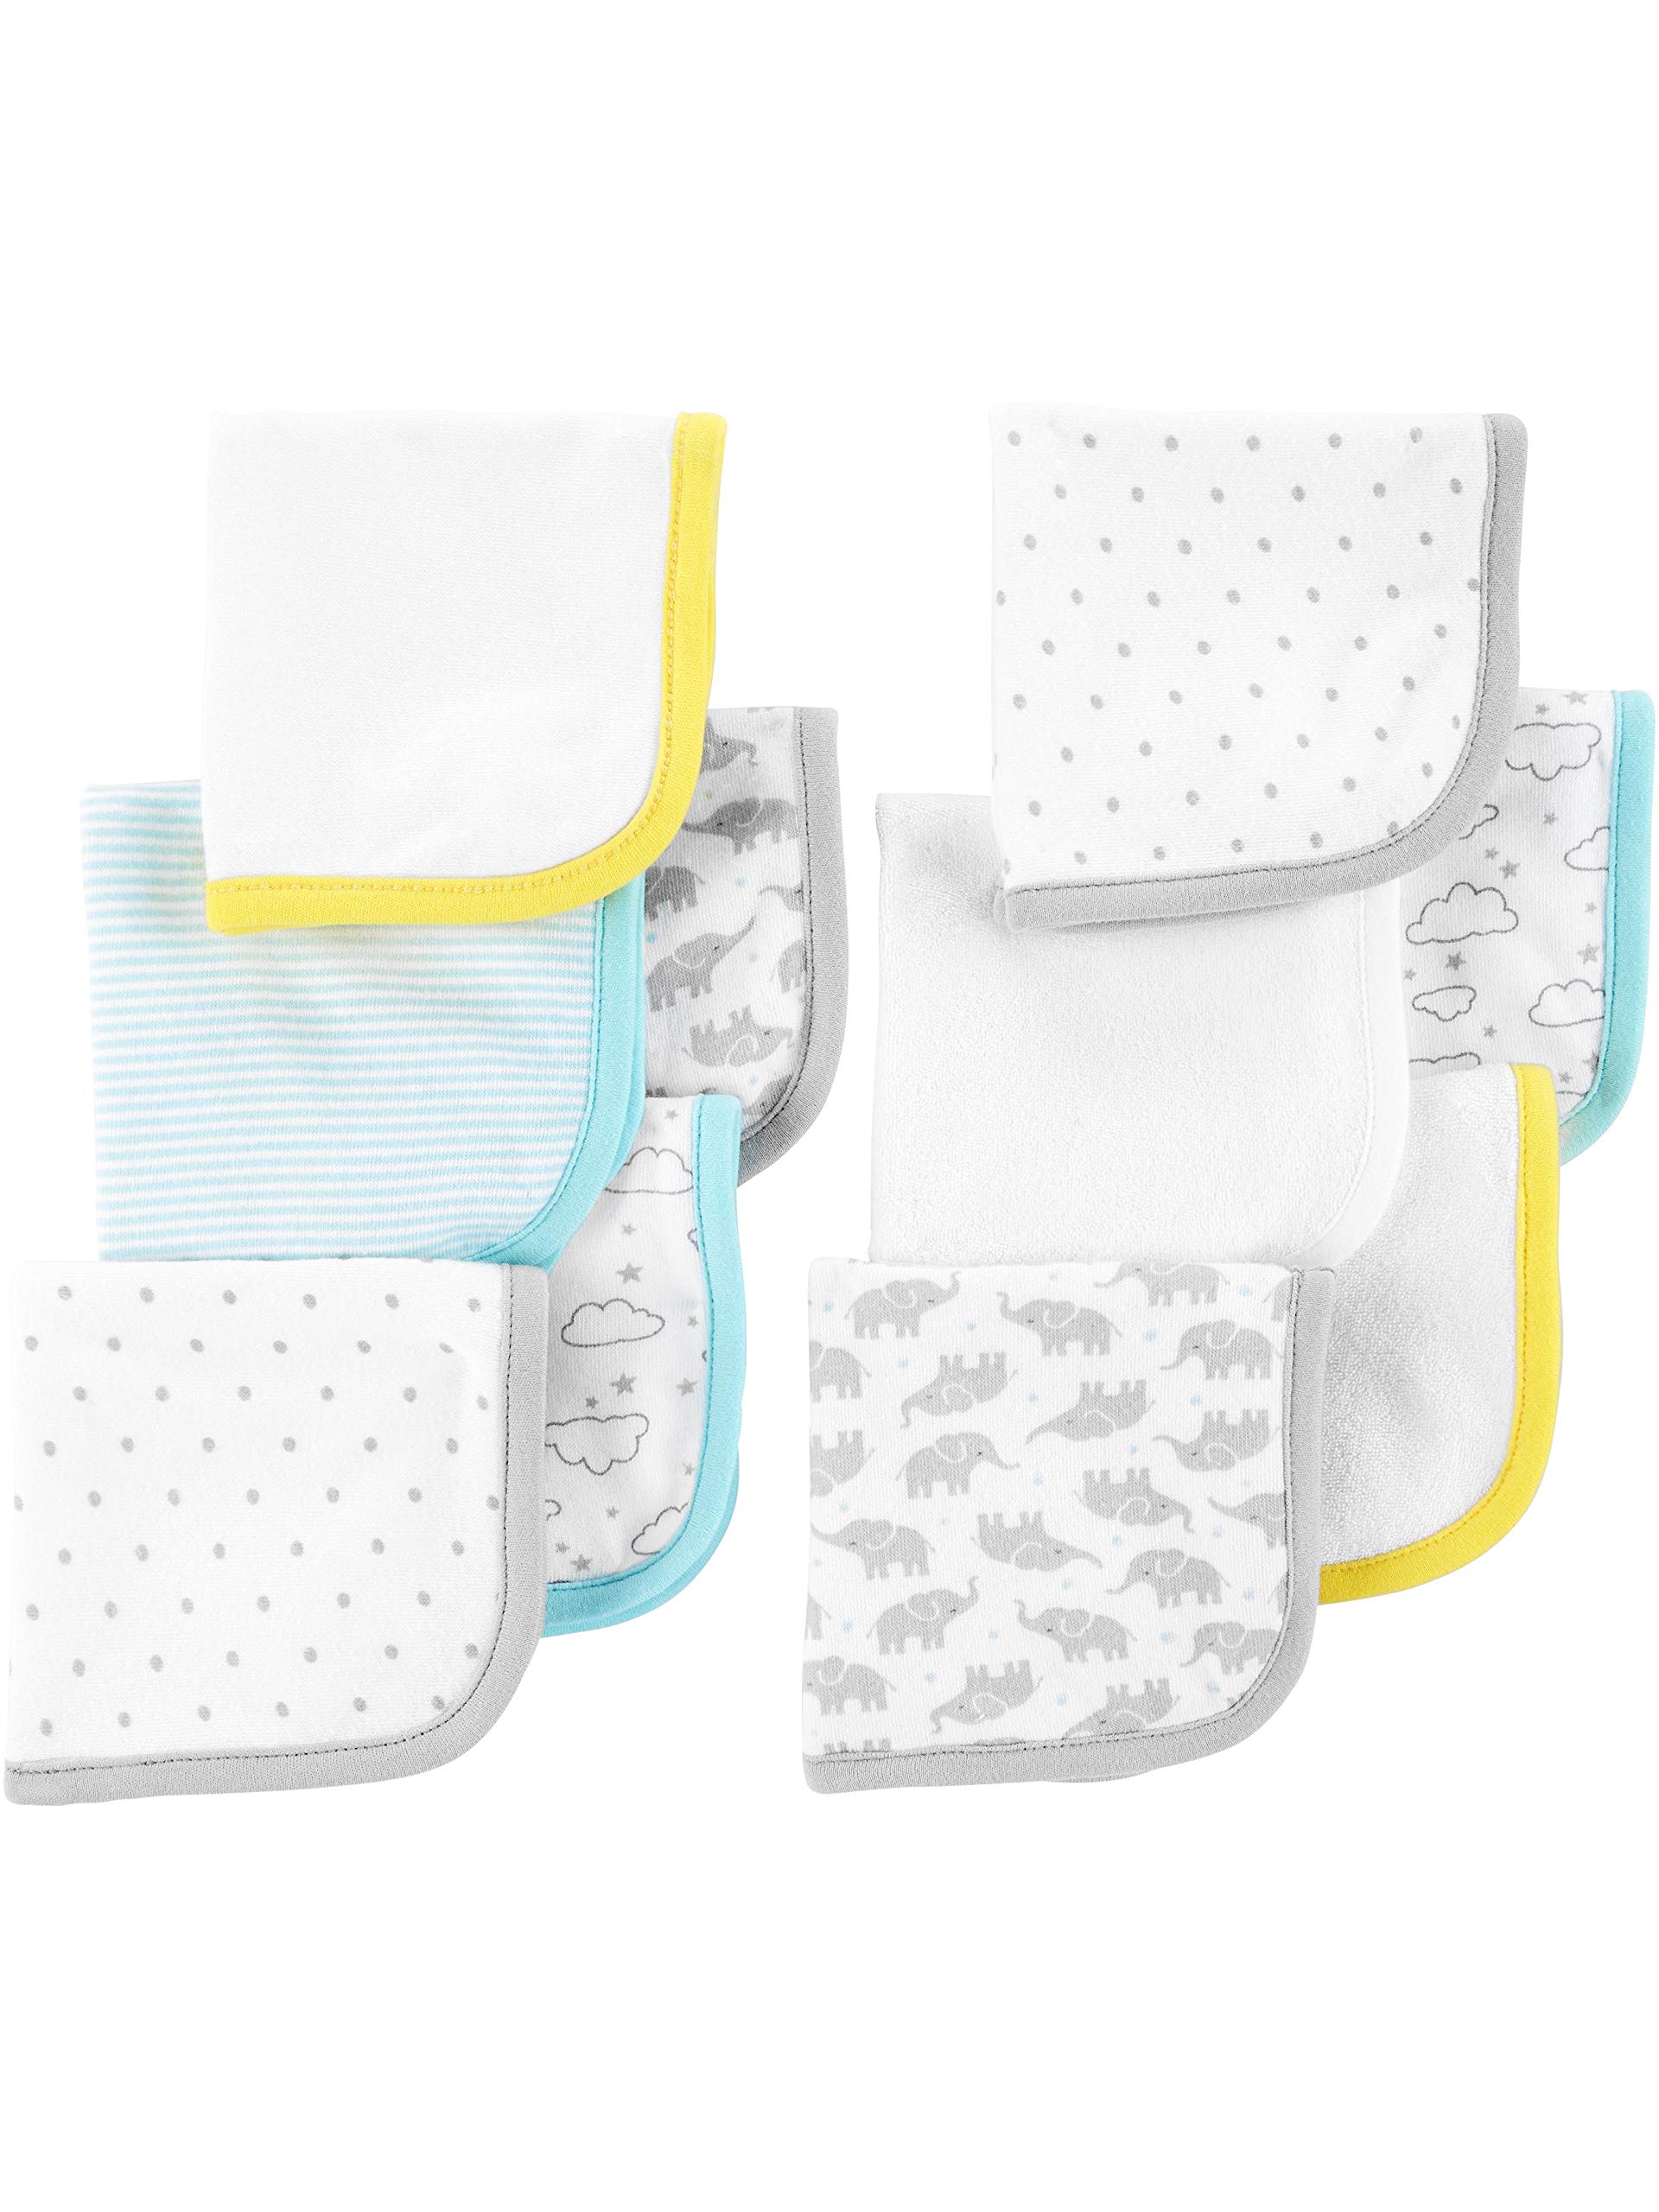 Simple Joys by Carter's Unisex Babies' Washcloth Set, Pack of 10